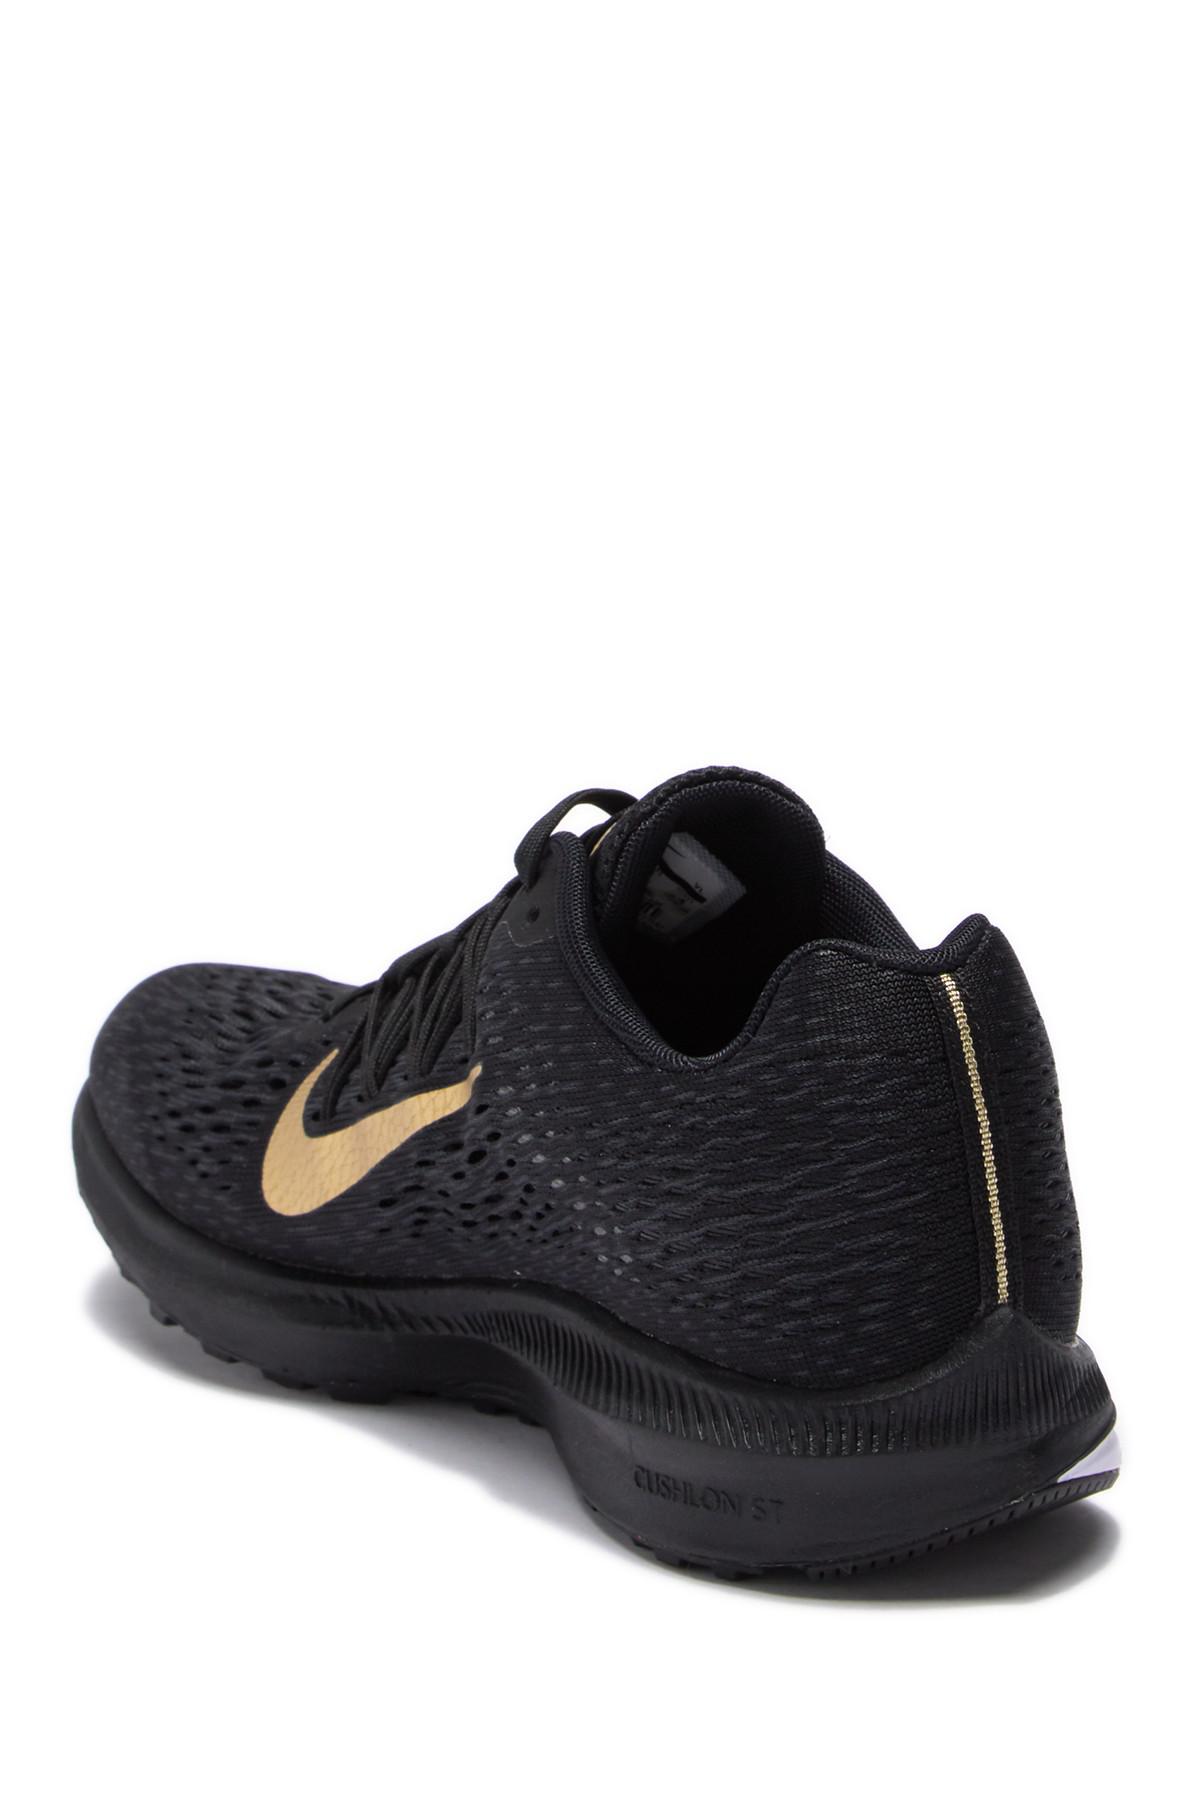 Nike Zoom Winflo 5 Running Shoes in 